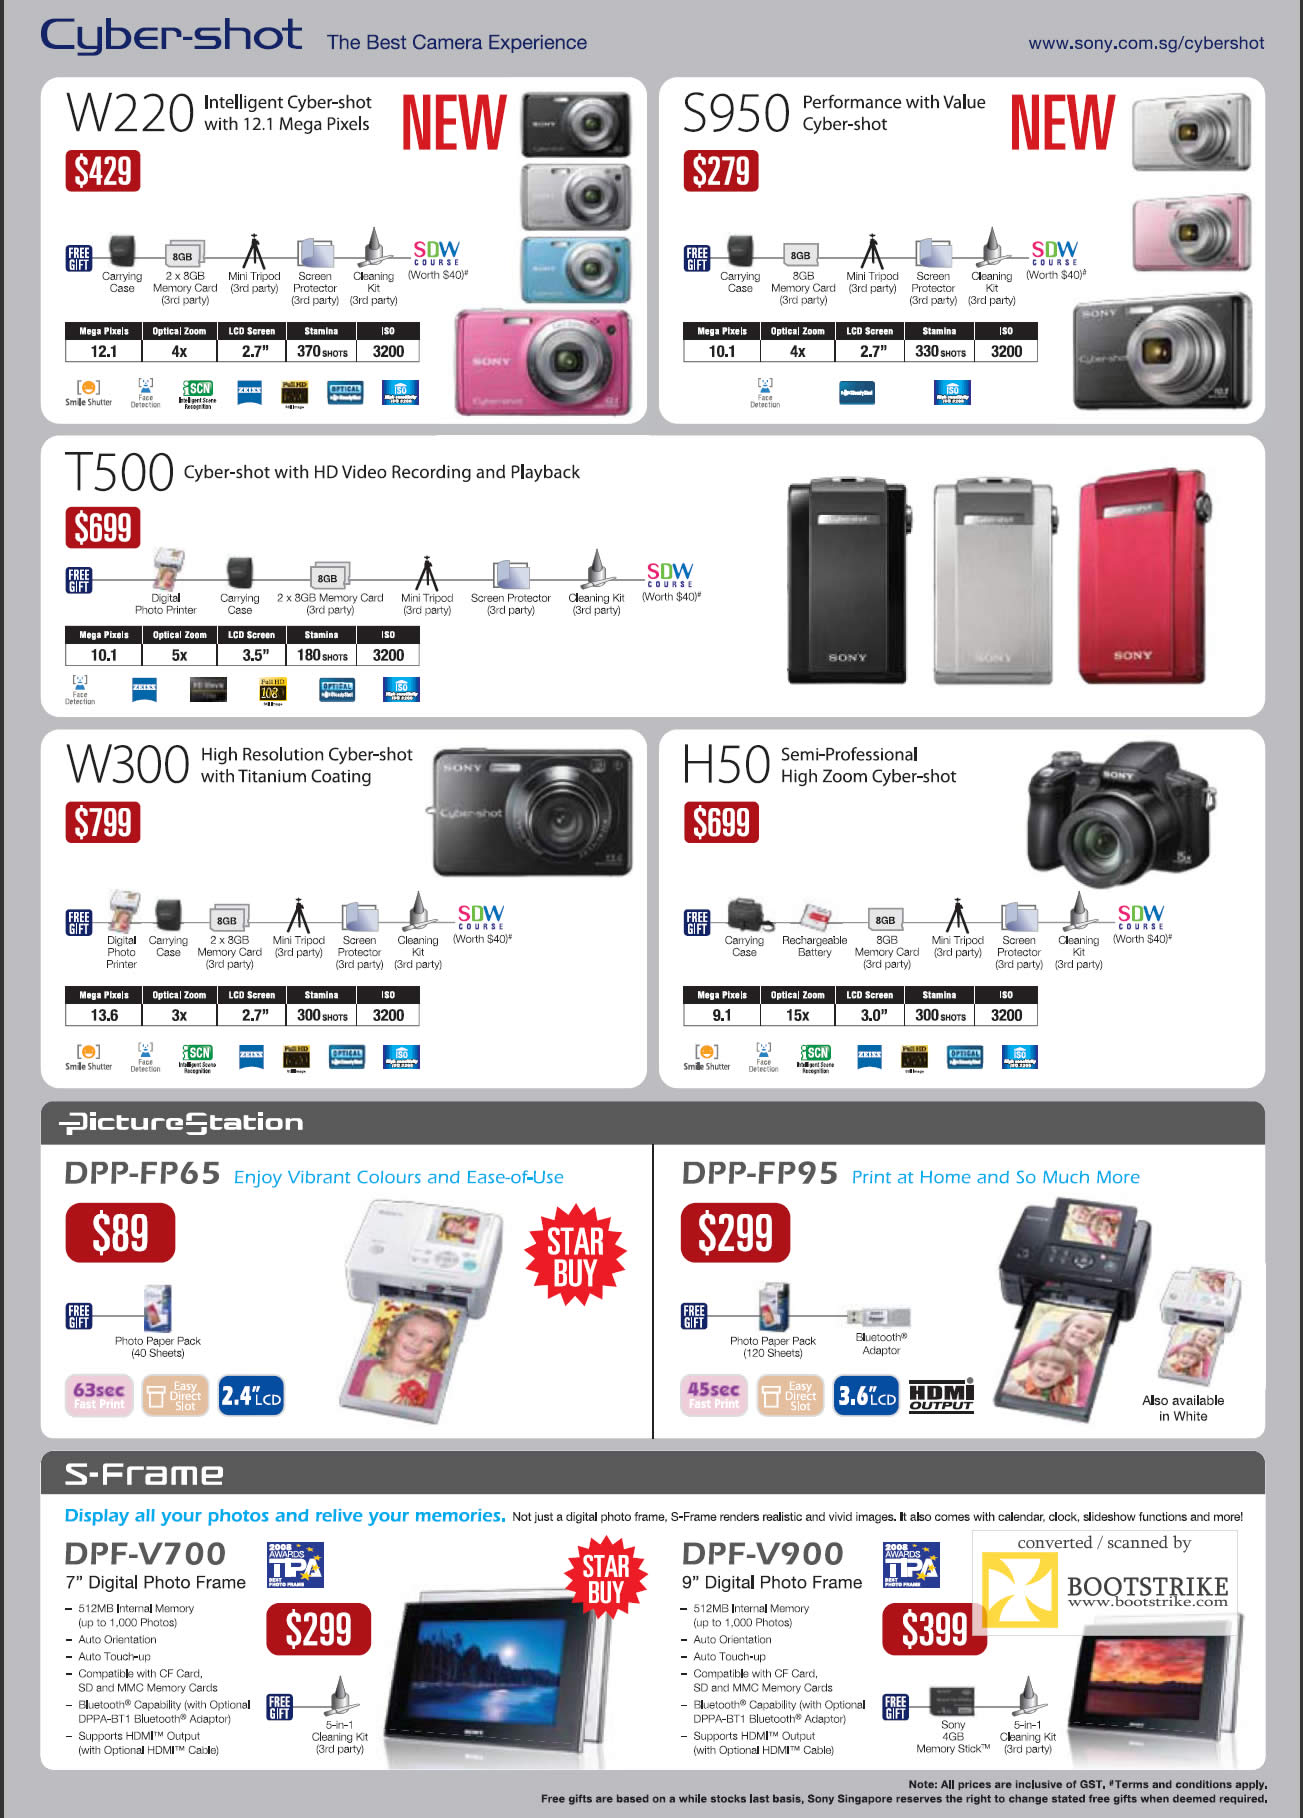 IT Show 2009 price list image brochure of Sony Cyber-shot Picture Station S-Frame